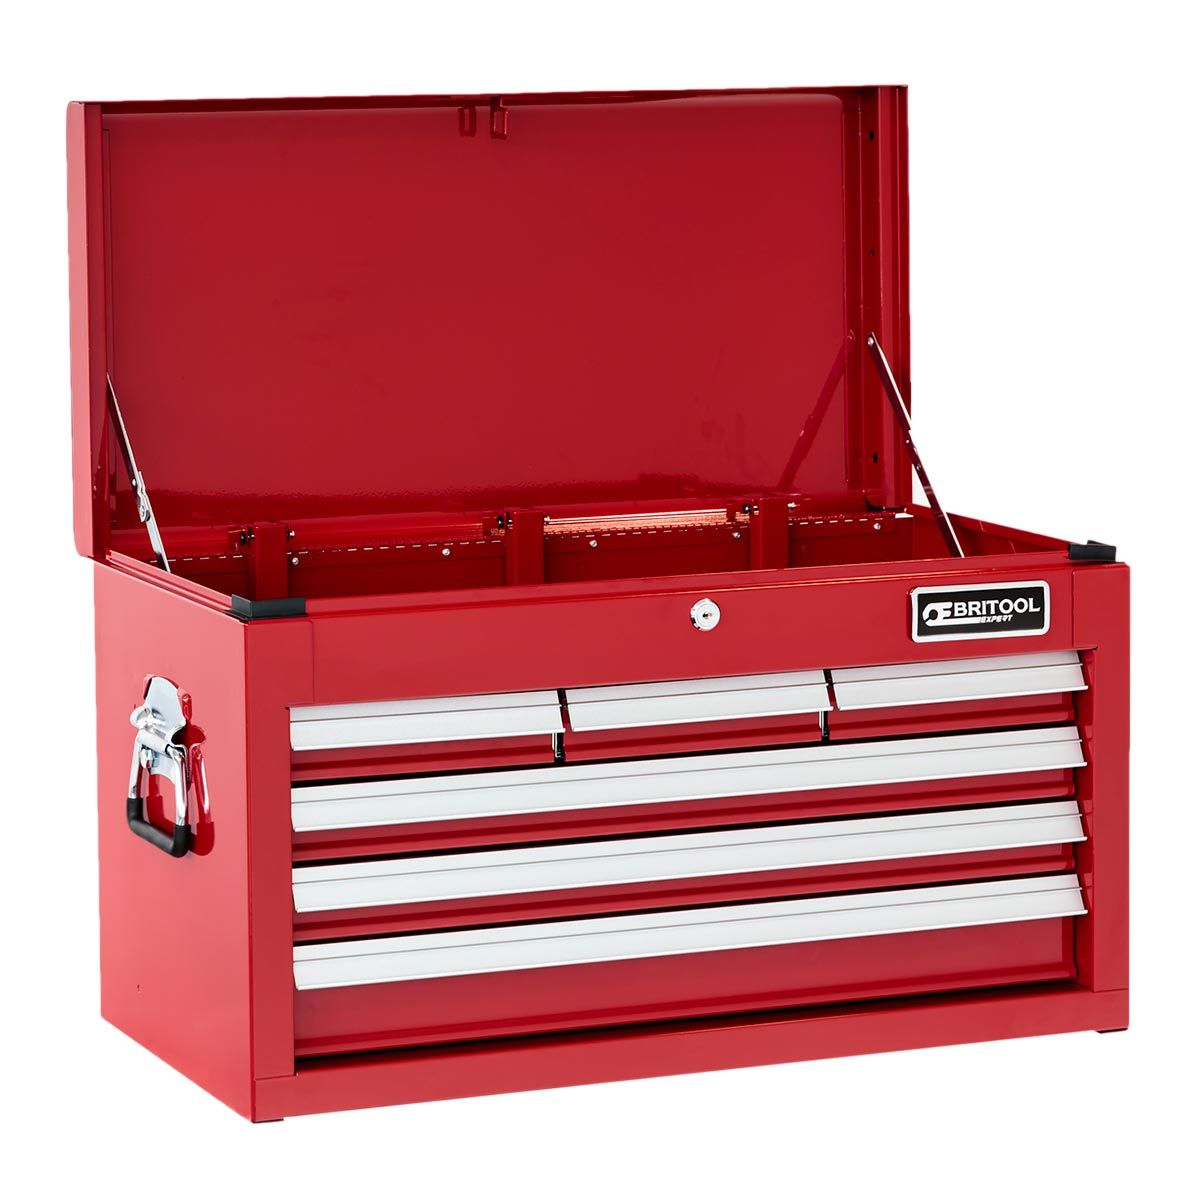 BRITOOL E010237B Classic 6 Drawer + Lift Top Tool Chest Red ETS